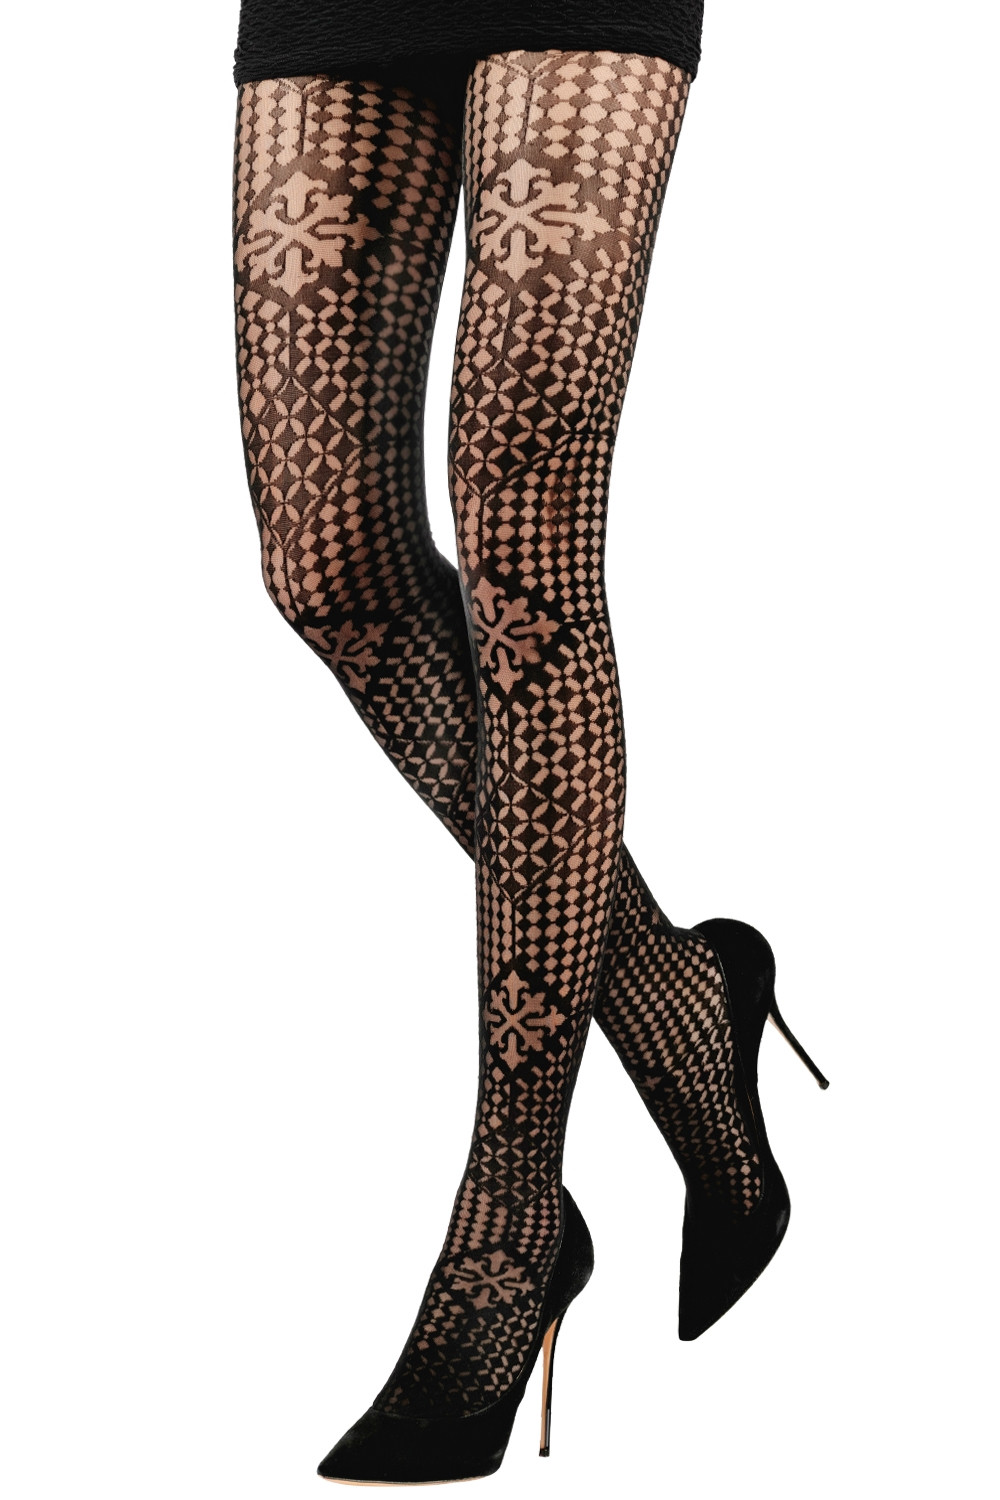 File:Knitted folklike tights with smooth panty section and legs in subtle  crochet look in the colour black –rear view.jpg - Wikimedia Commons